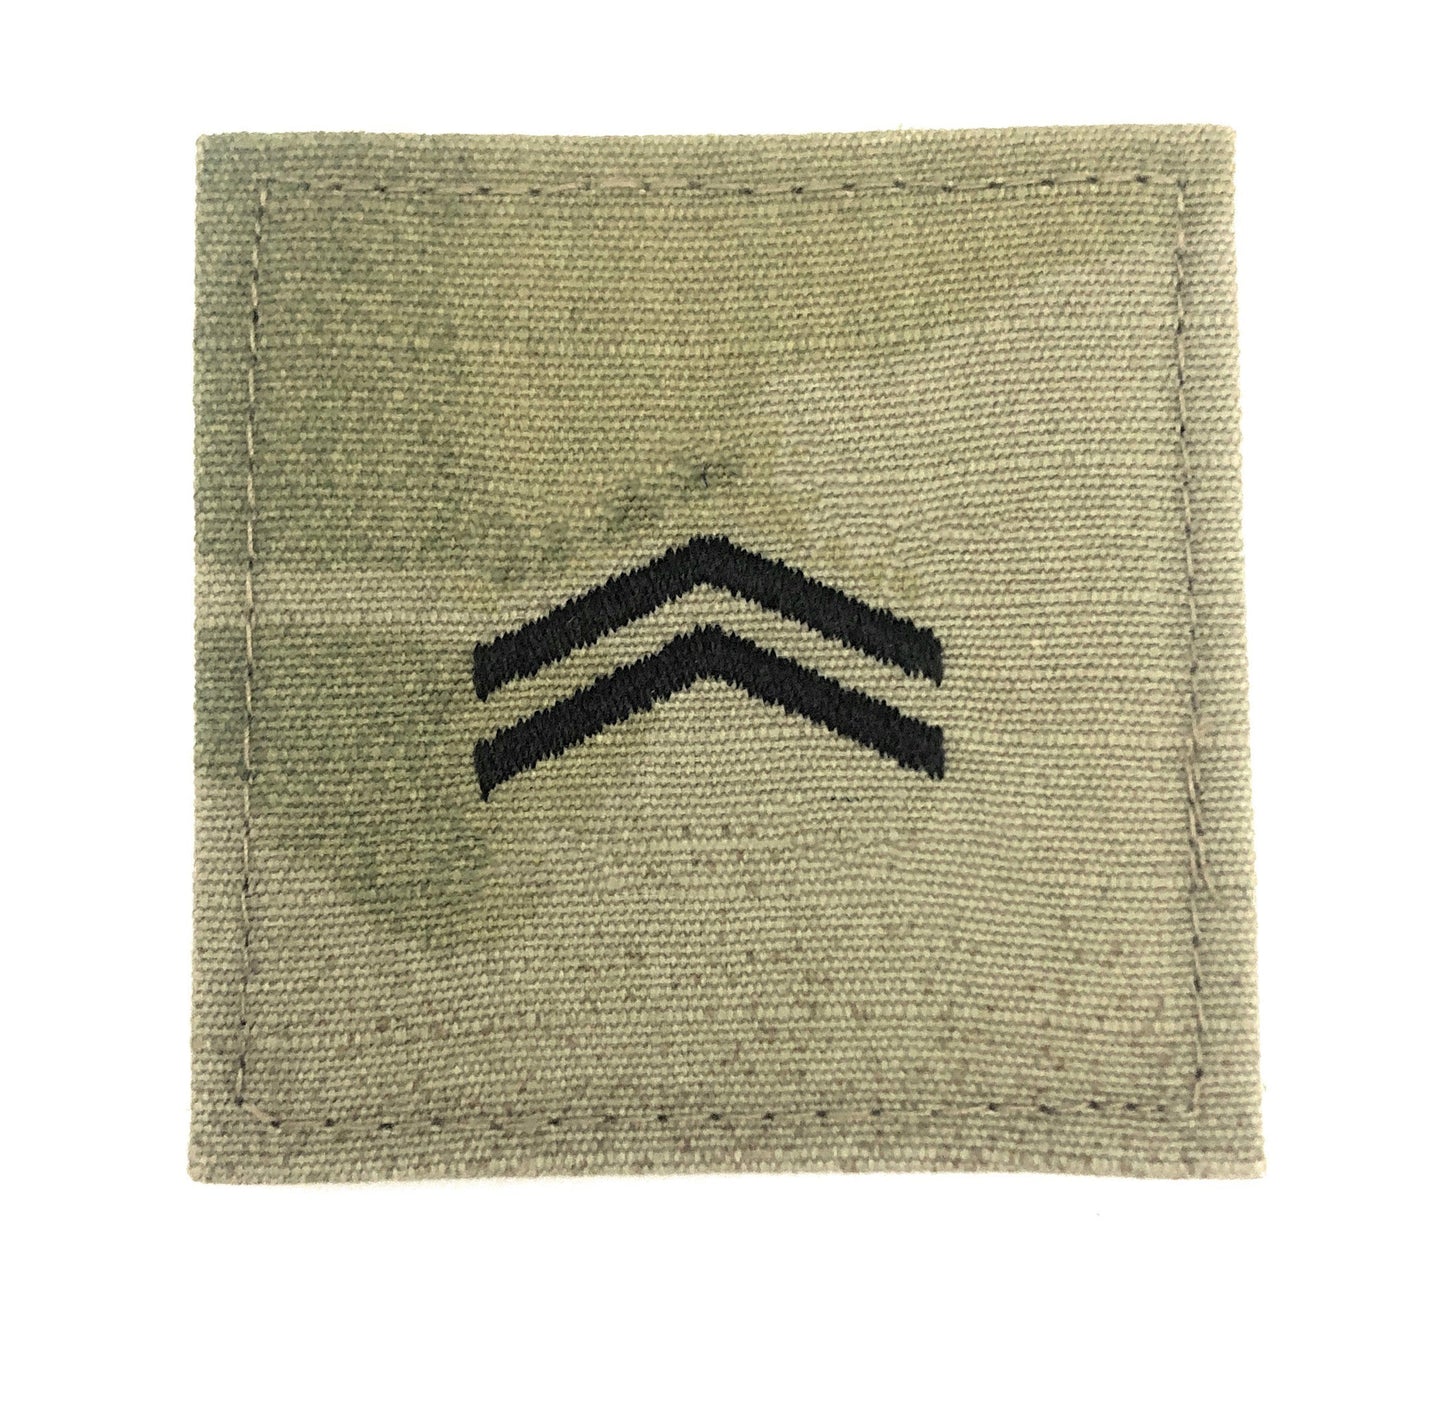 ROTC Corporal OCP Rank with Hook Fastener